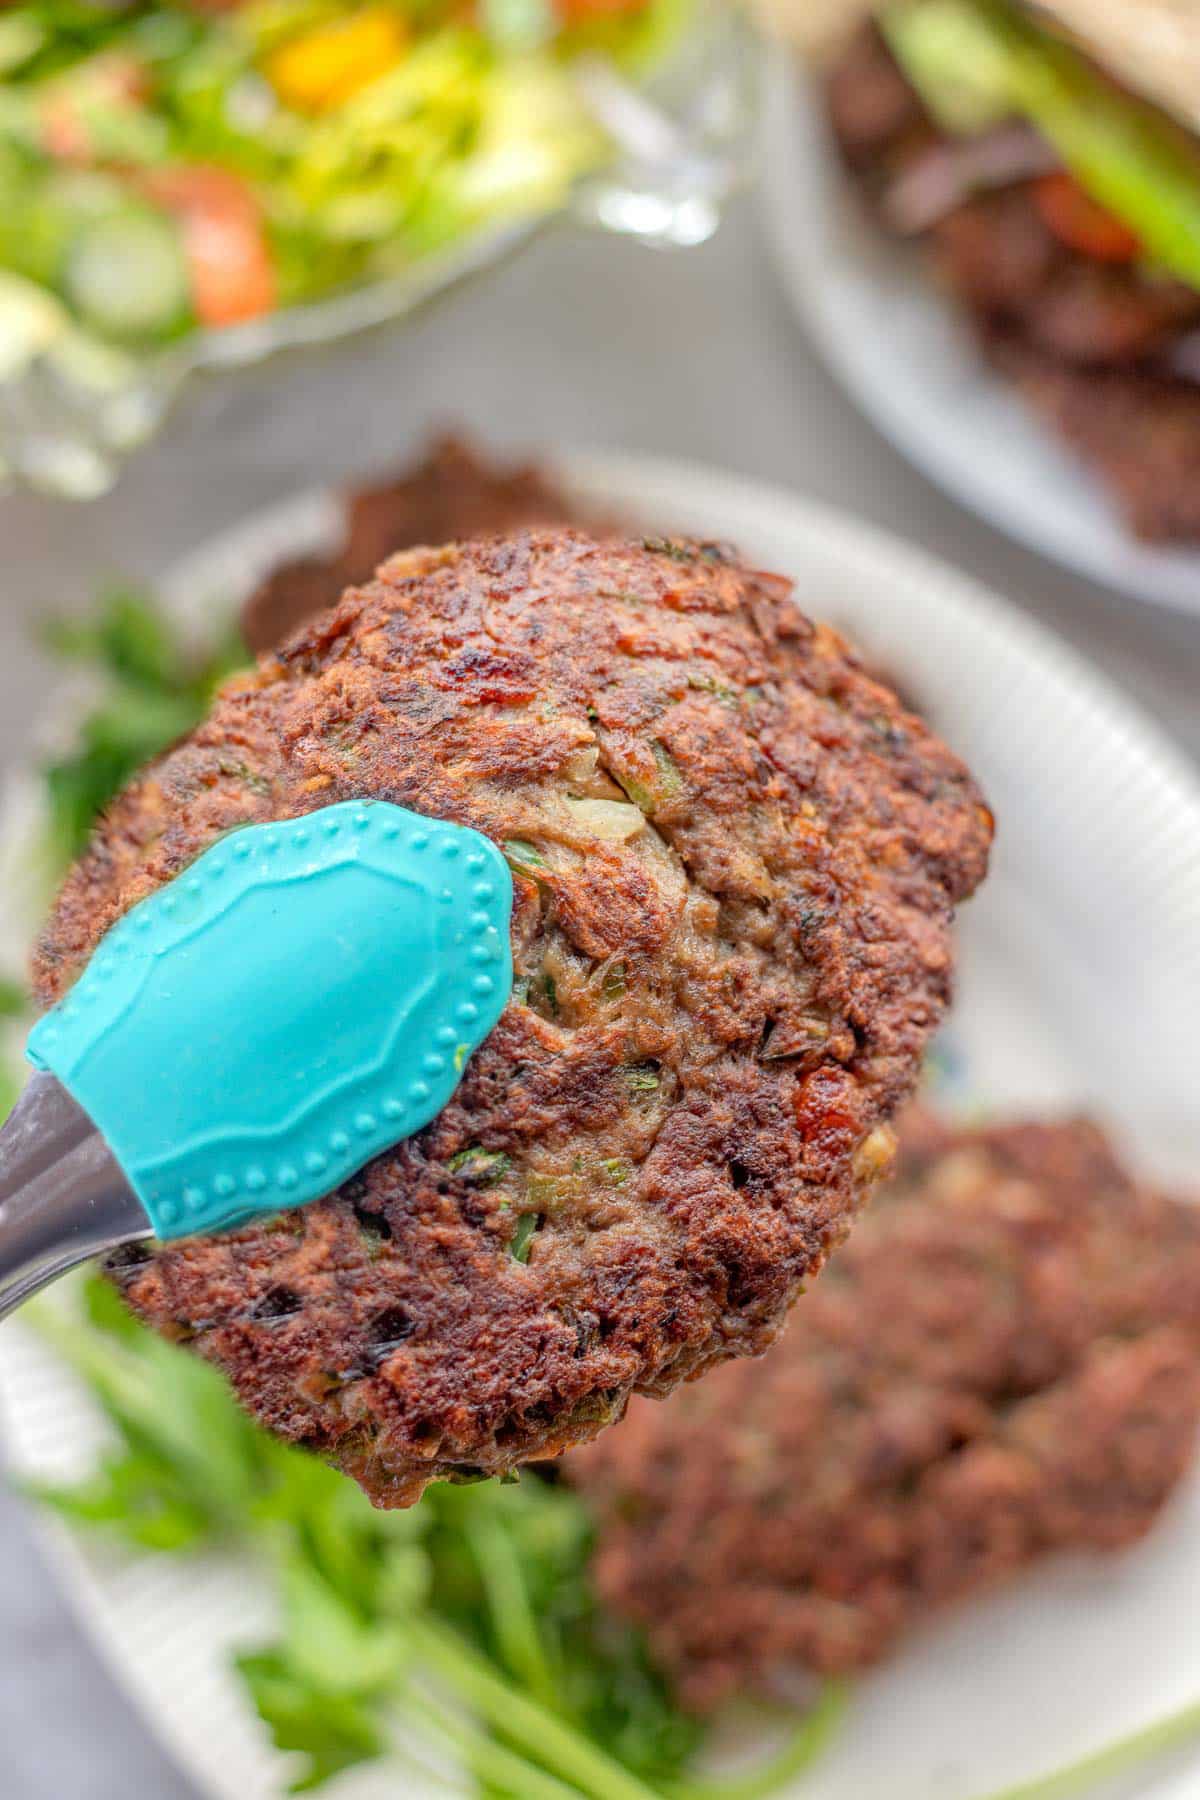 arook (meat patty) being served